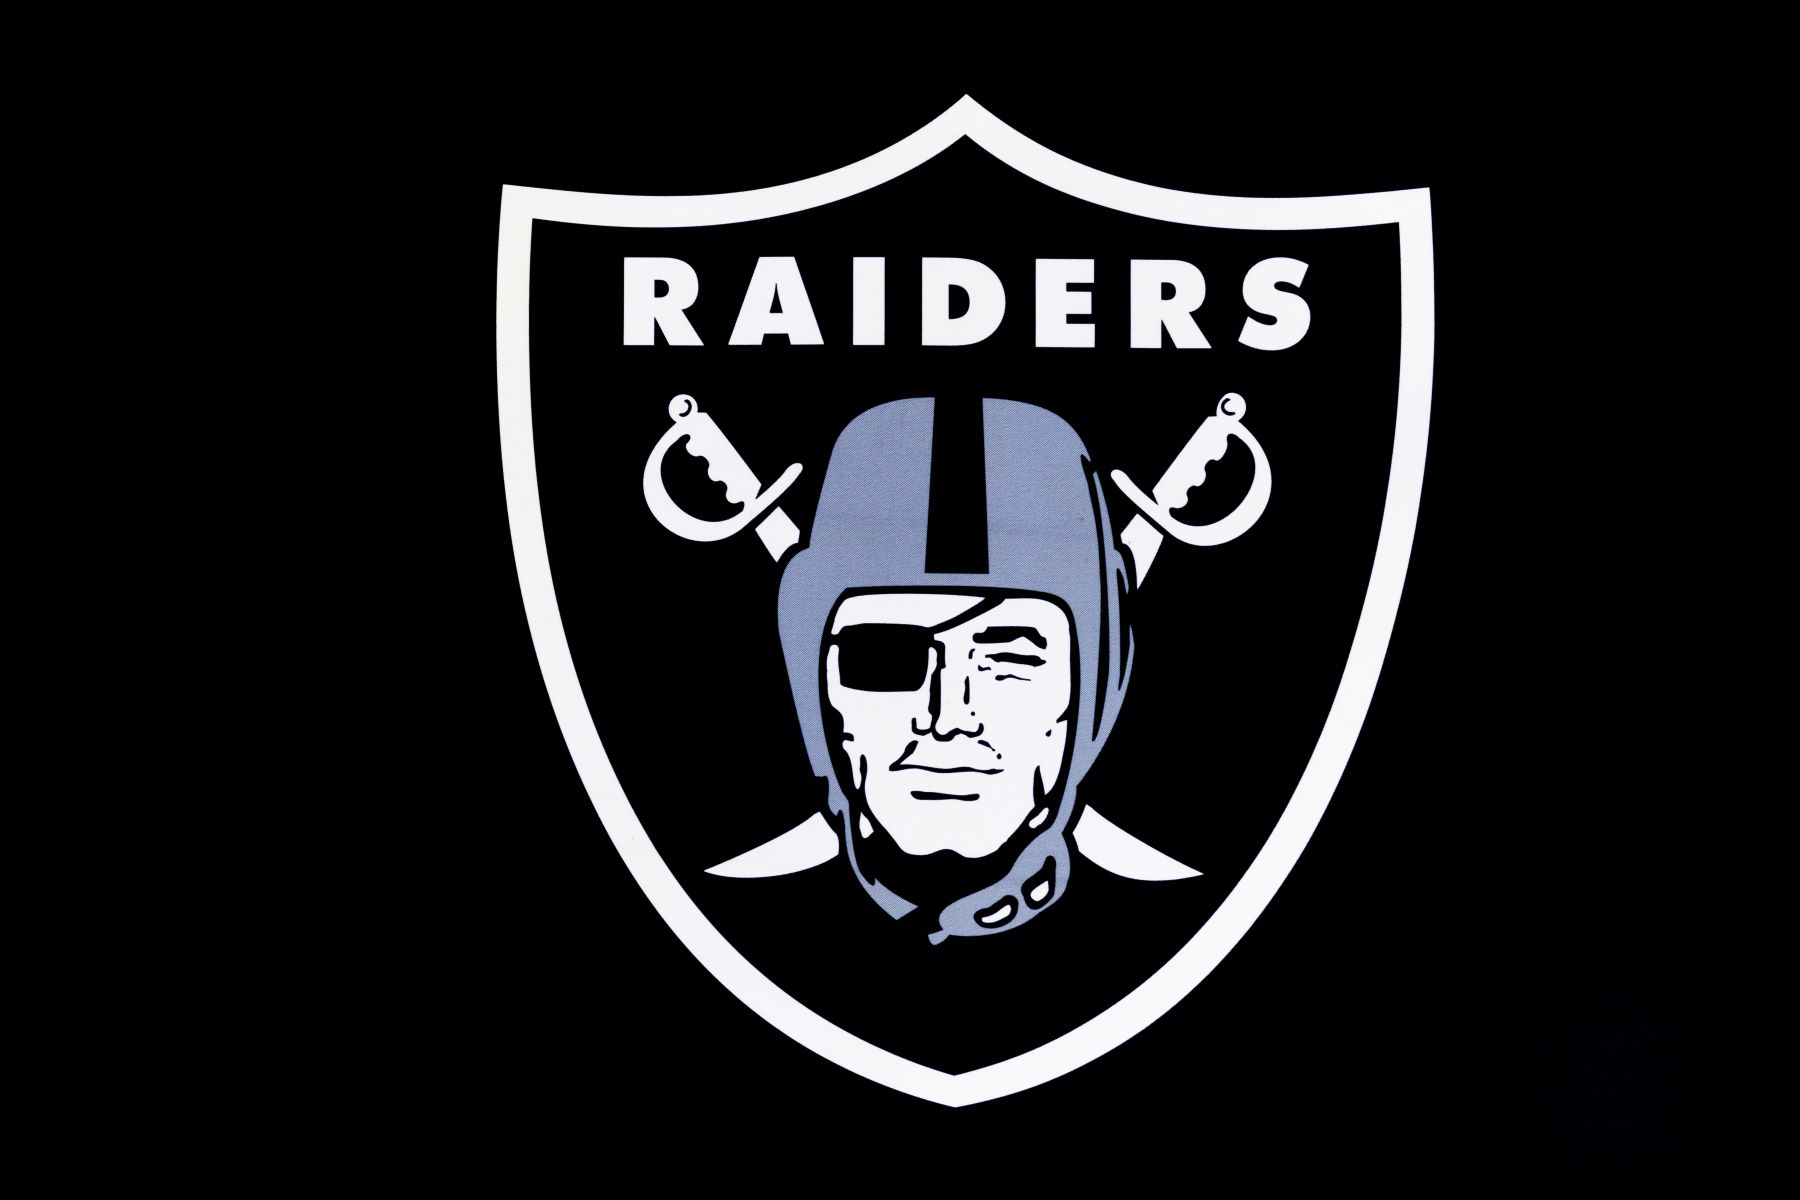 NFL team Las Vegas Raiders logo seen at the Los Angeles Convention Center during the Super Bowl Experience